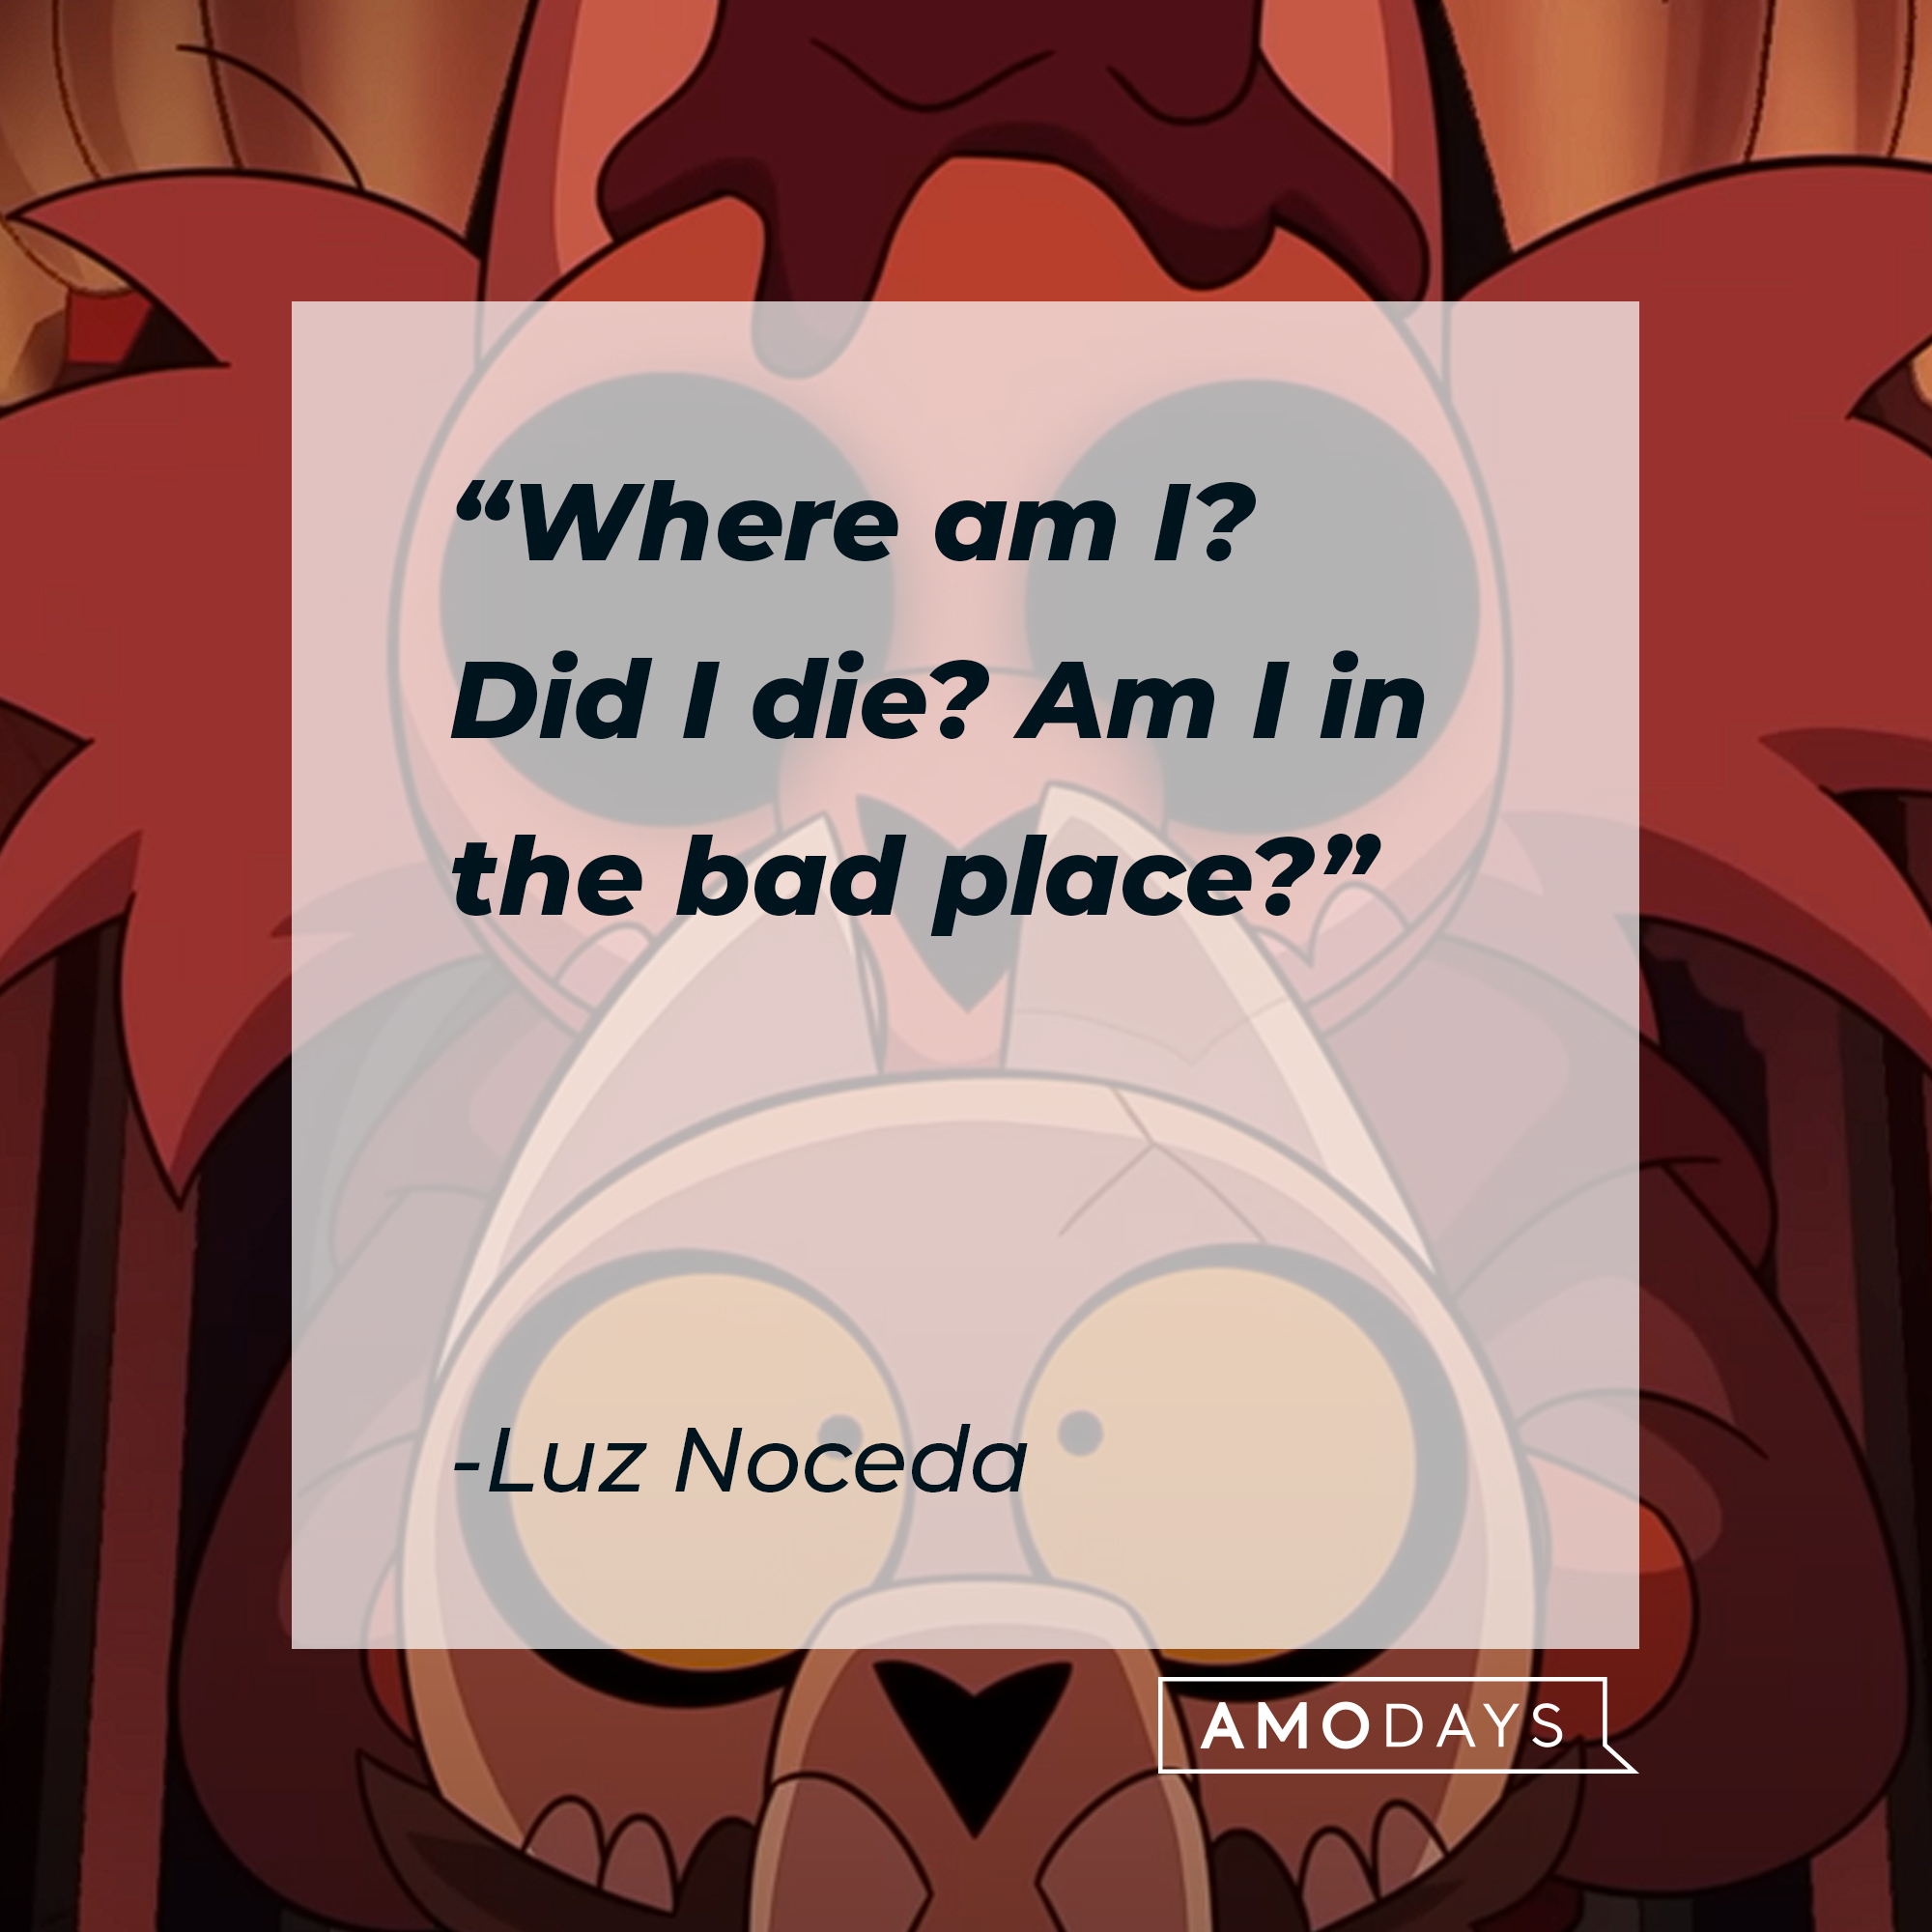 Luz Noceda's quote: “Where am I? Did I die? Am I in the bad place?” | Source: youtube.com/disneychannel